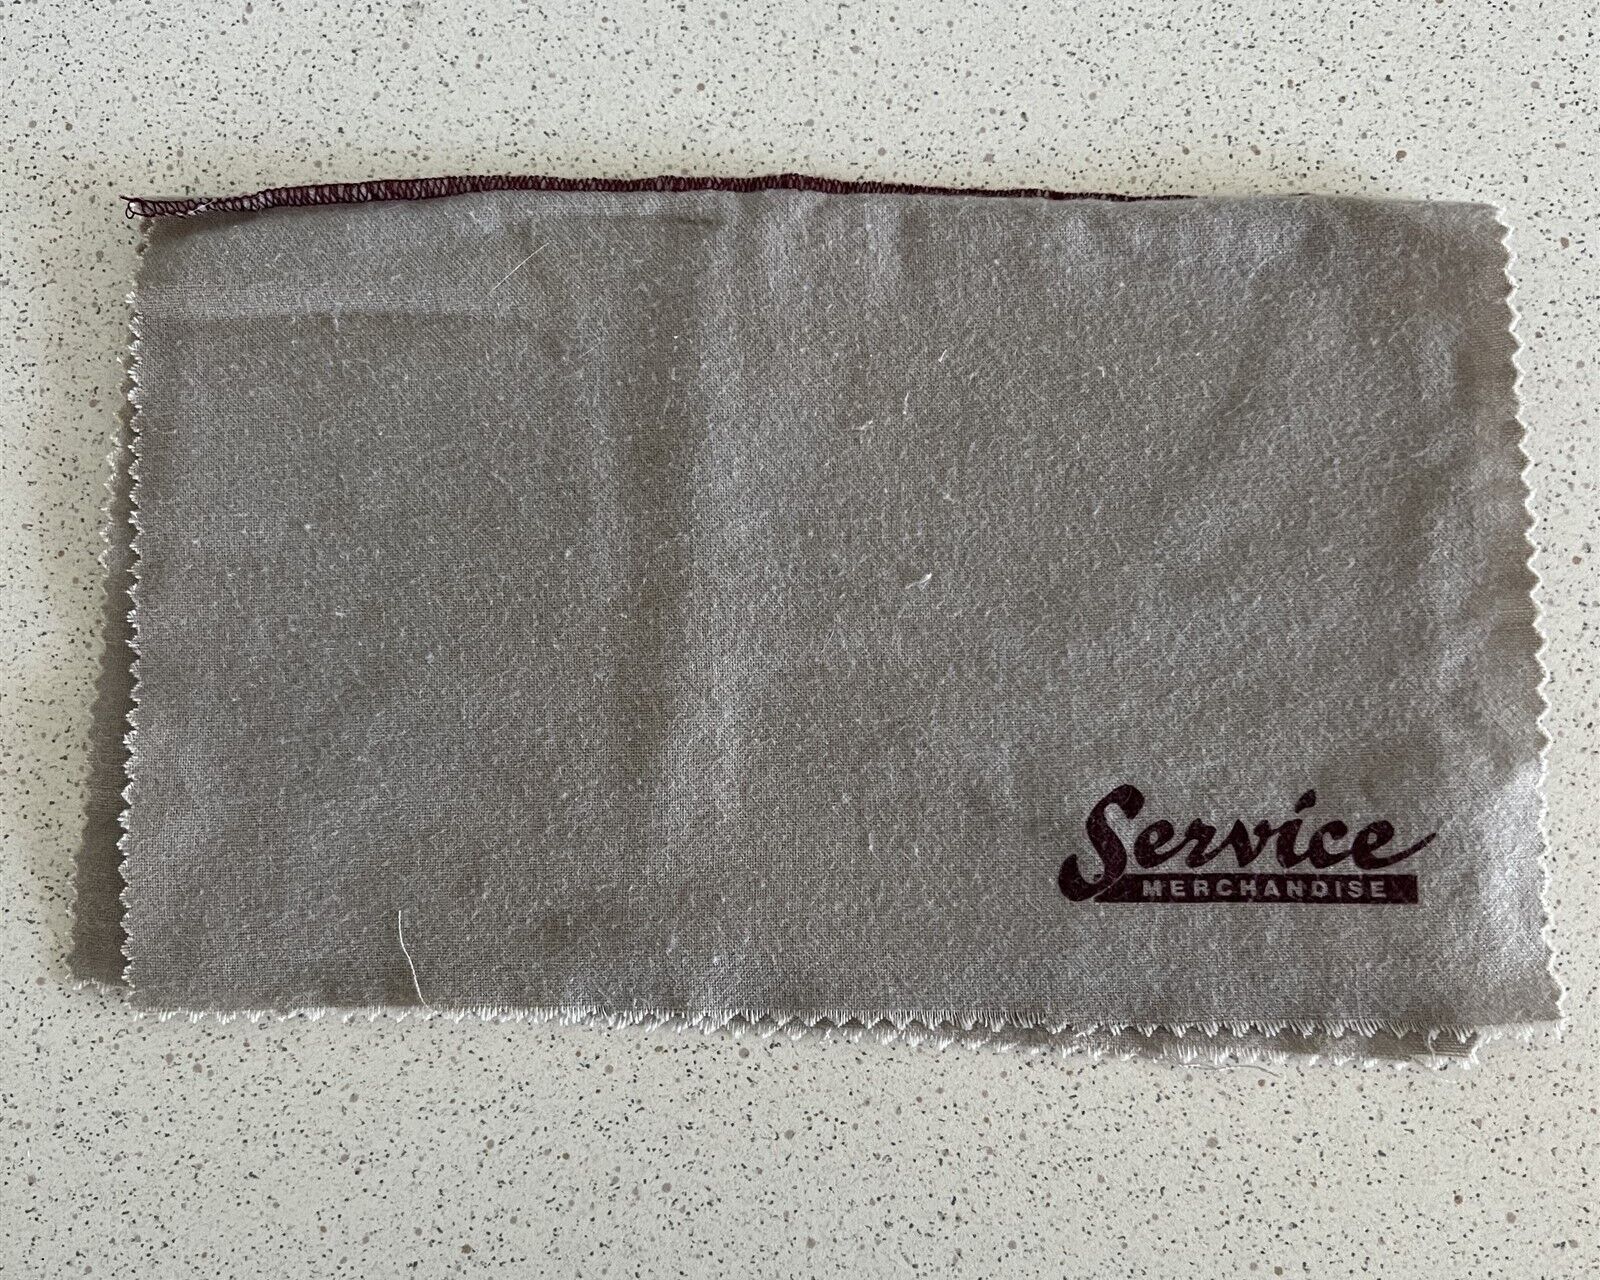 Vintage Service Merchandise Department Store Jewelry Polishing Cloth 